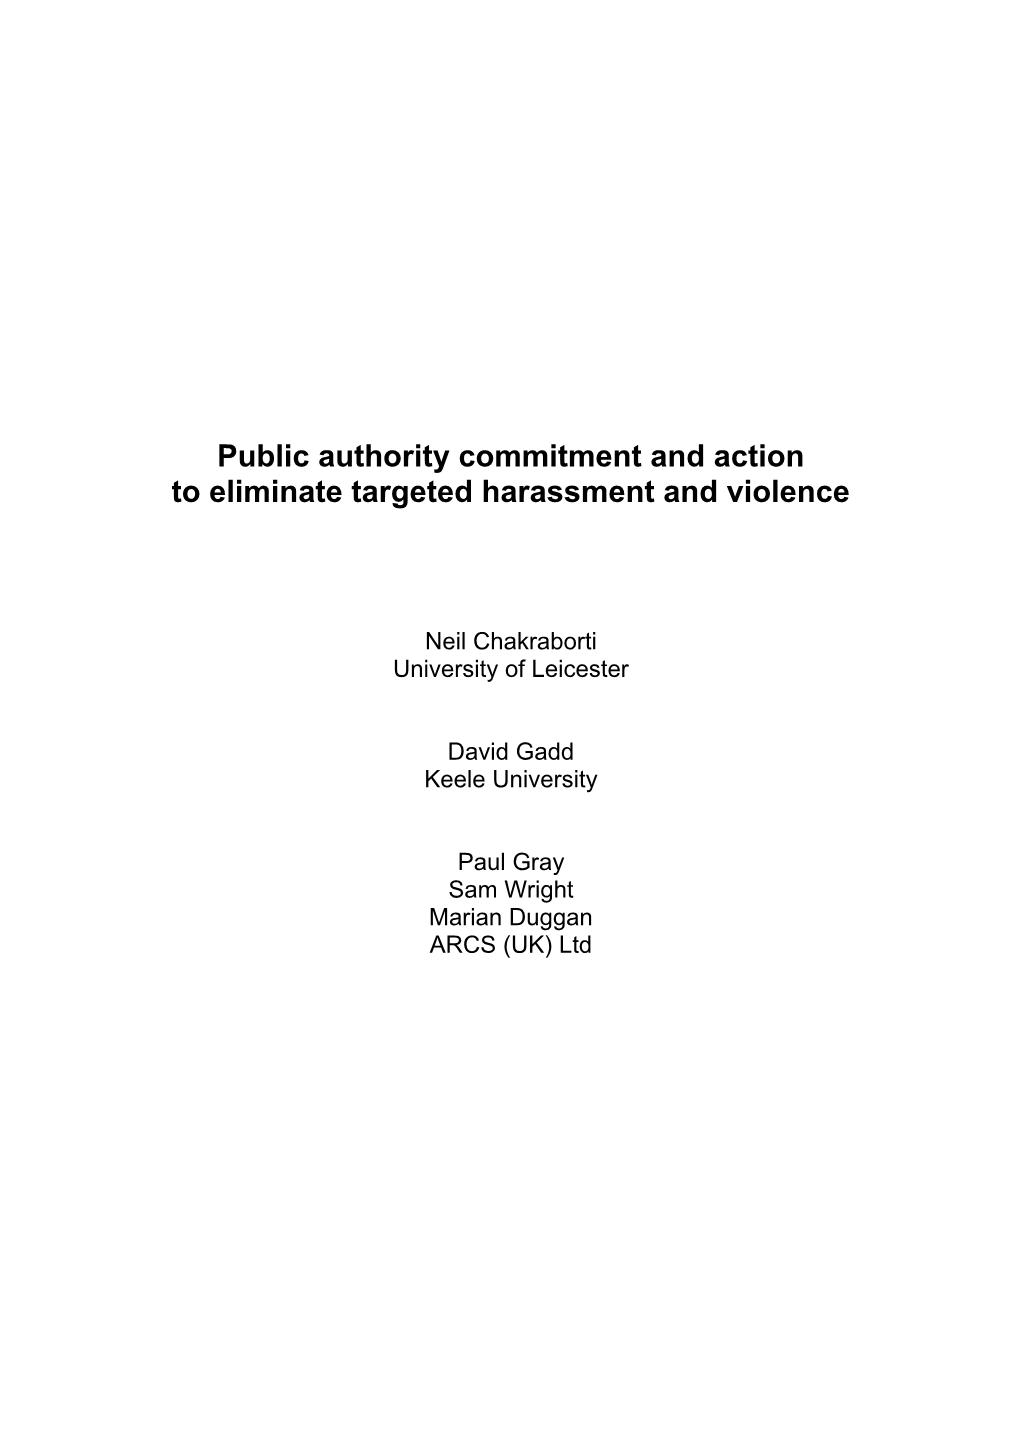 Public Authority Commitment and Action